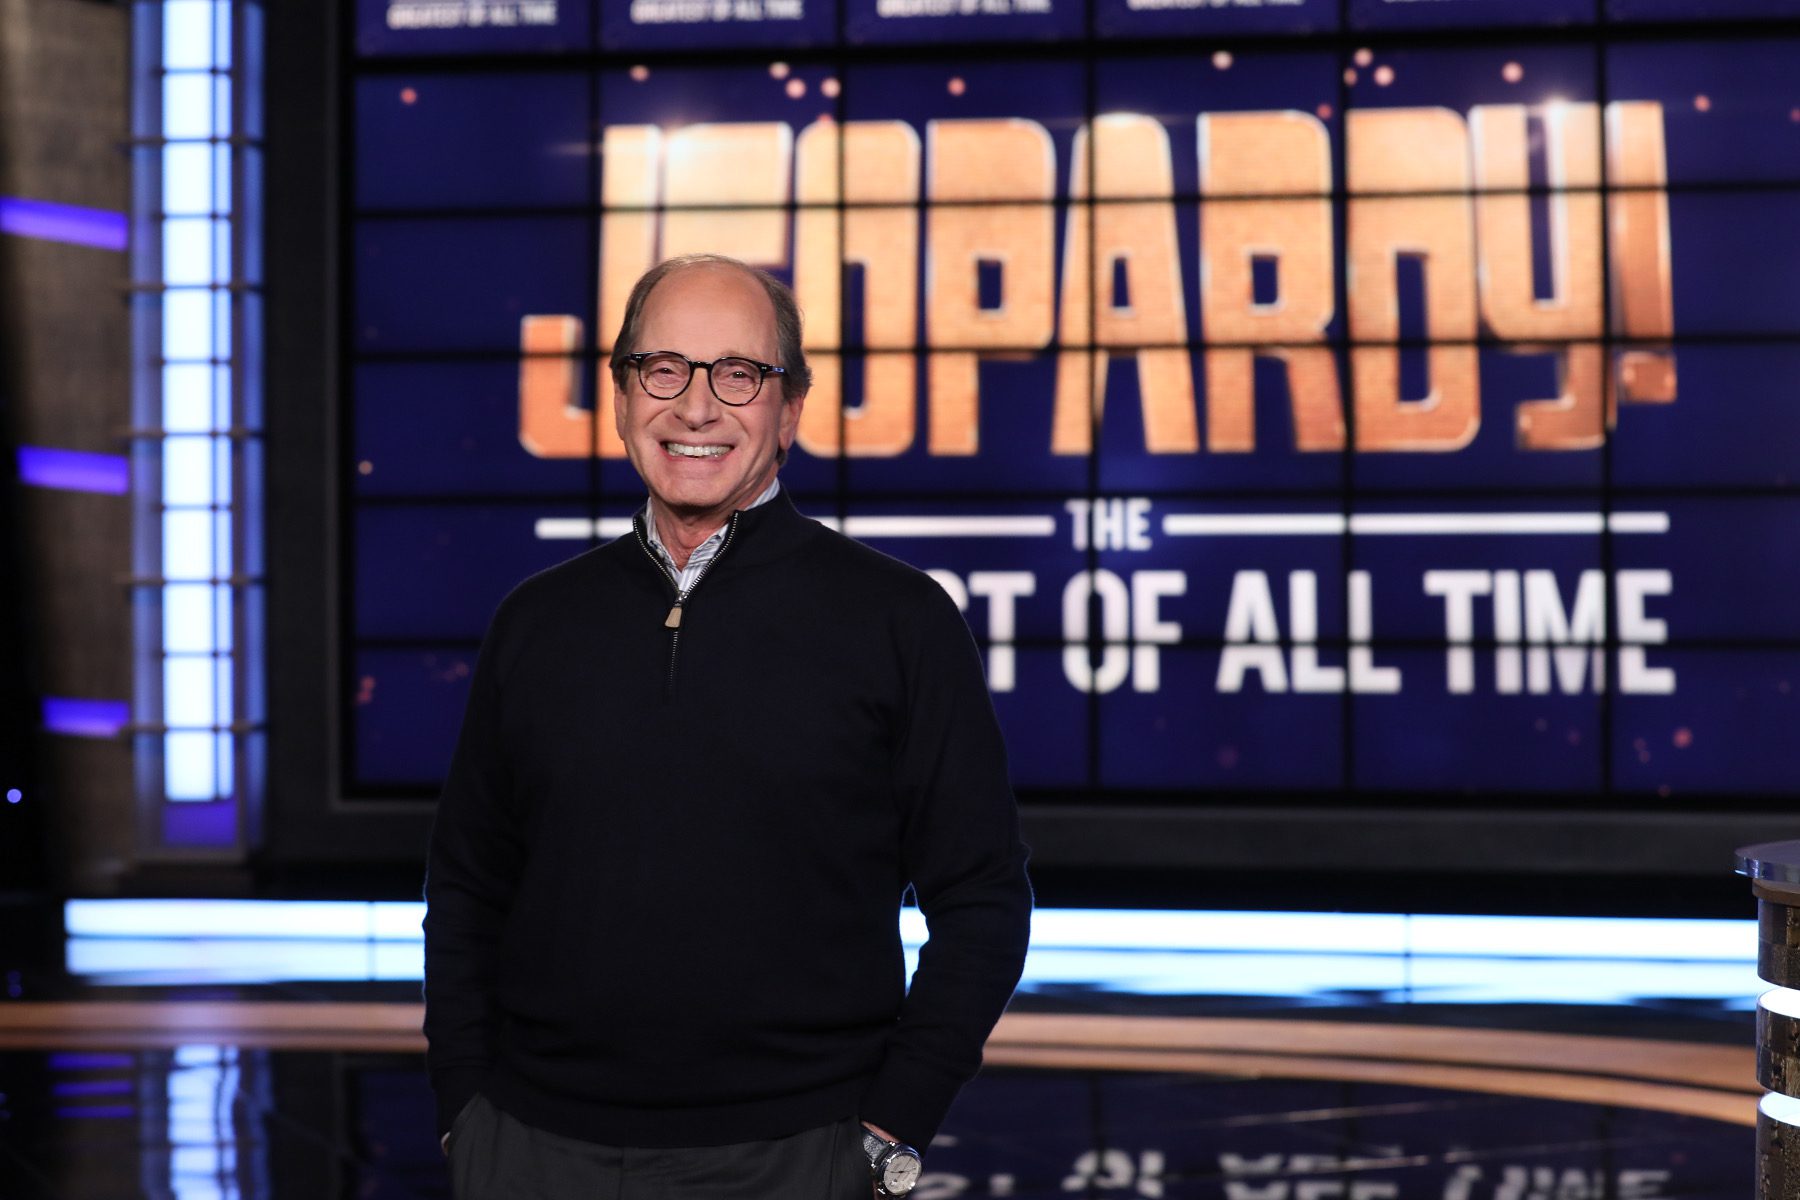 Harry Friedman, standing in front of a Jeopardy! sign